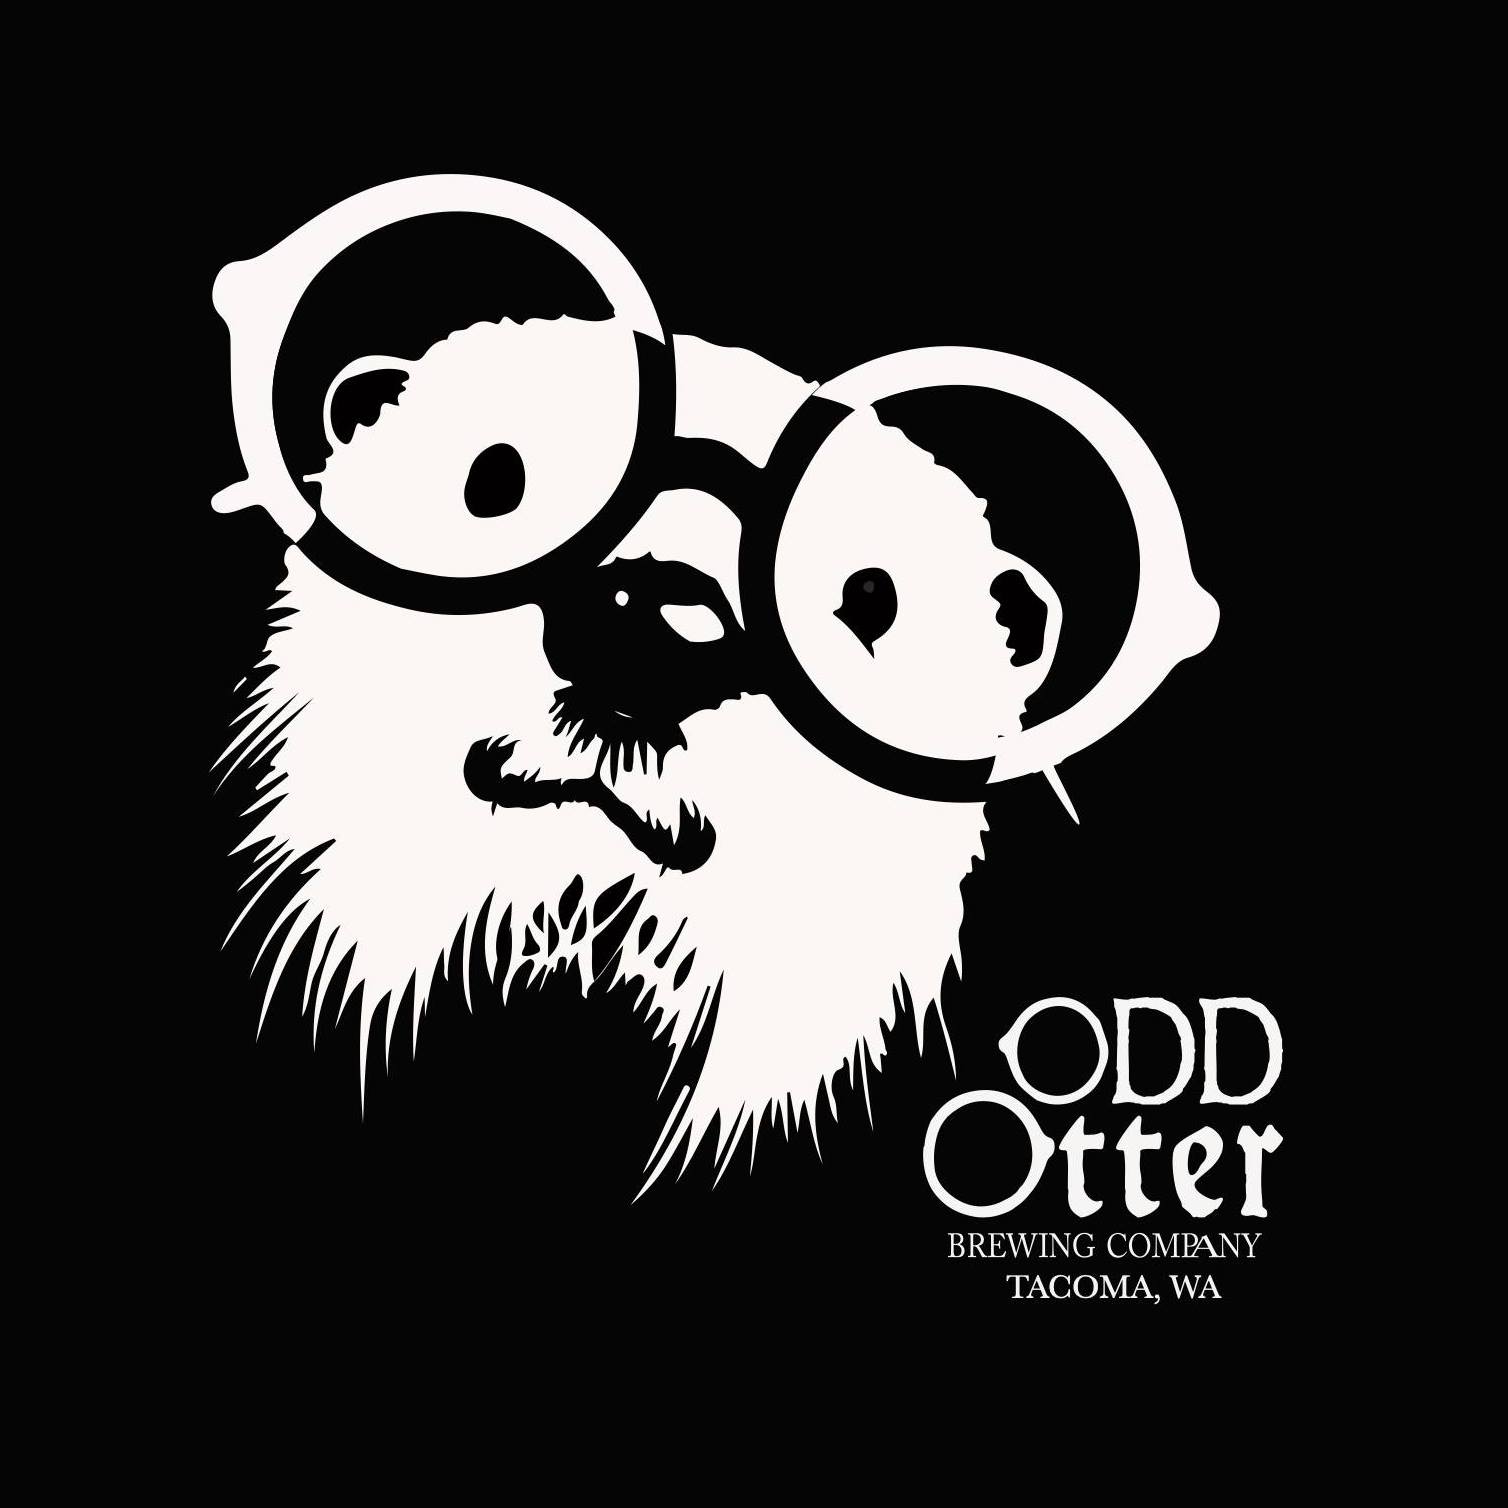 Business logo of Odd Otter Brewing Company